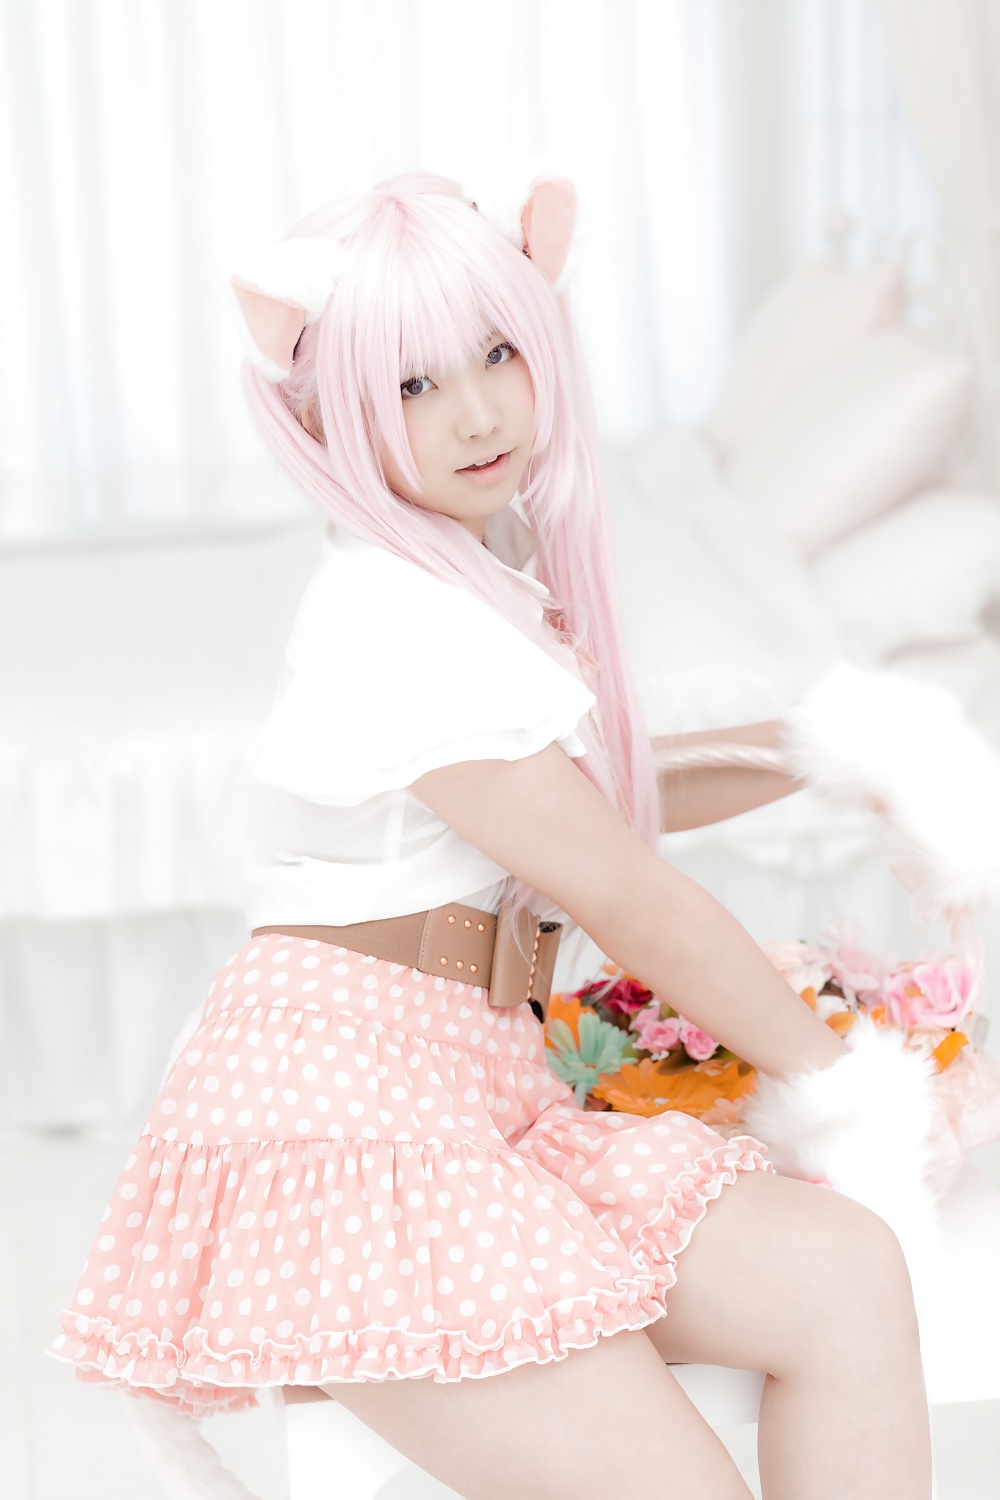 Asiatica cosplay in bianco
 #26558725